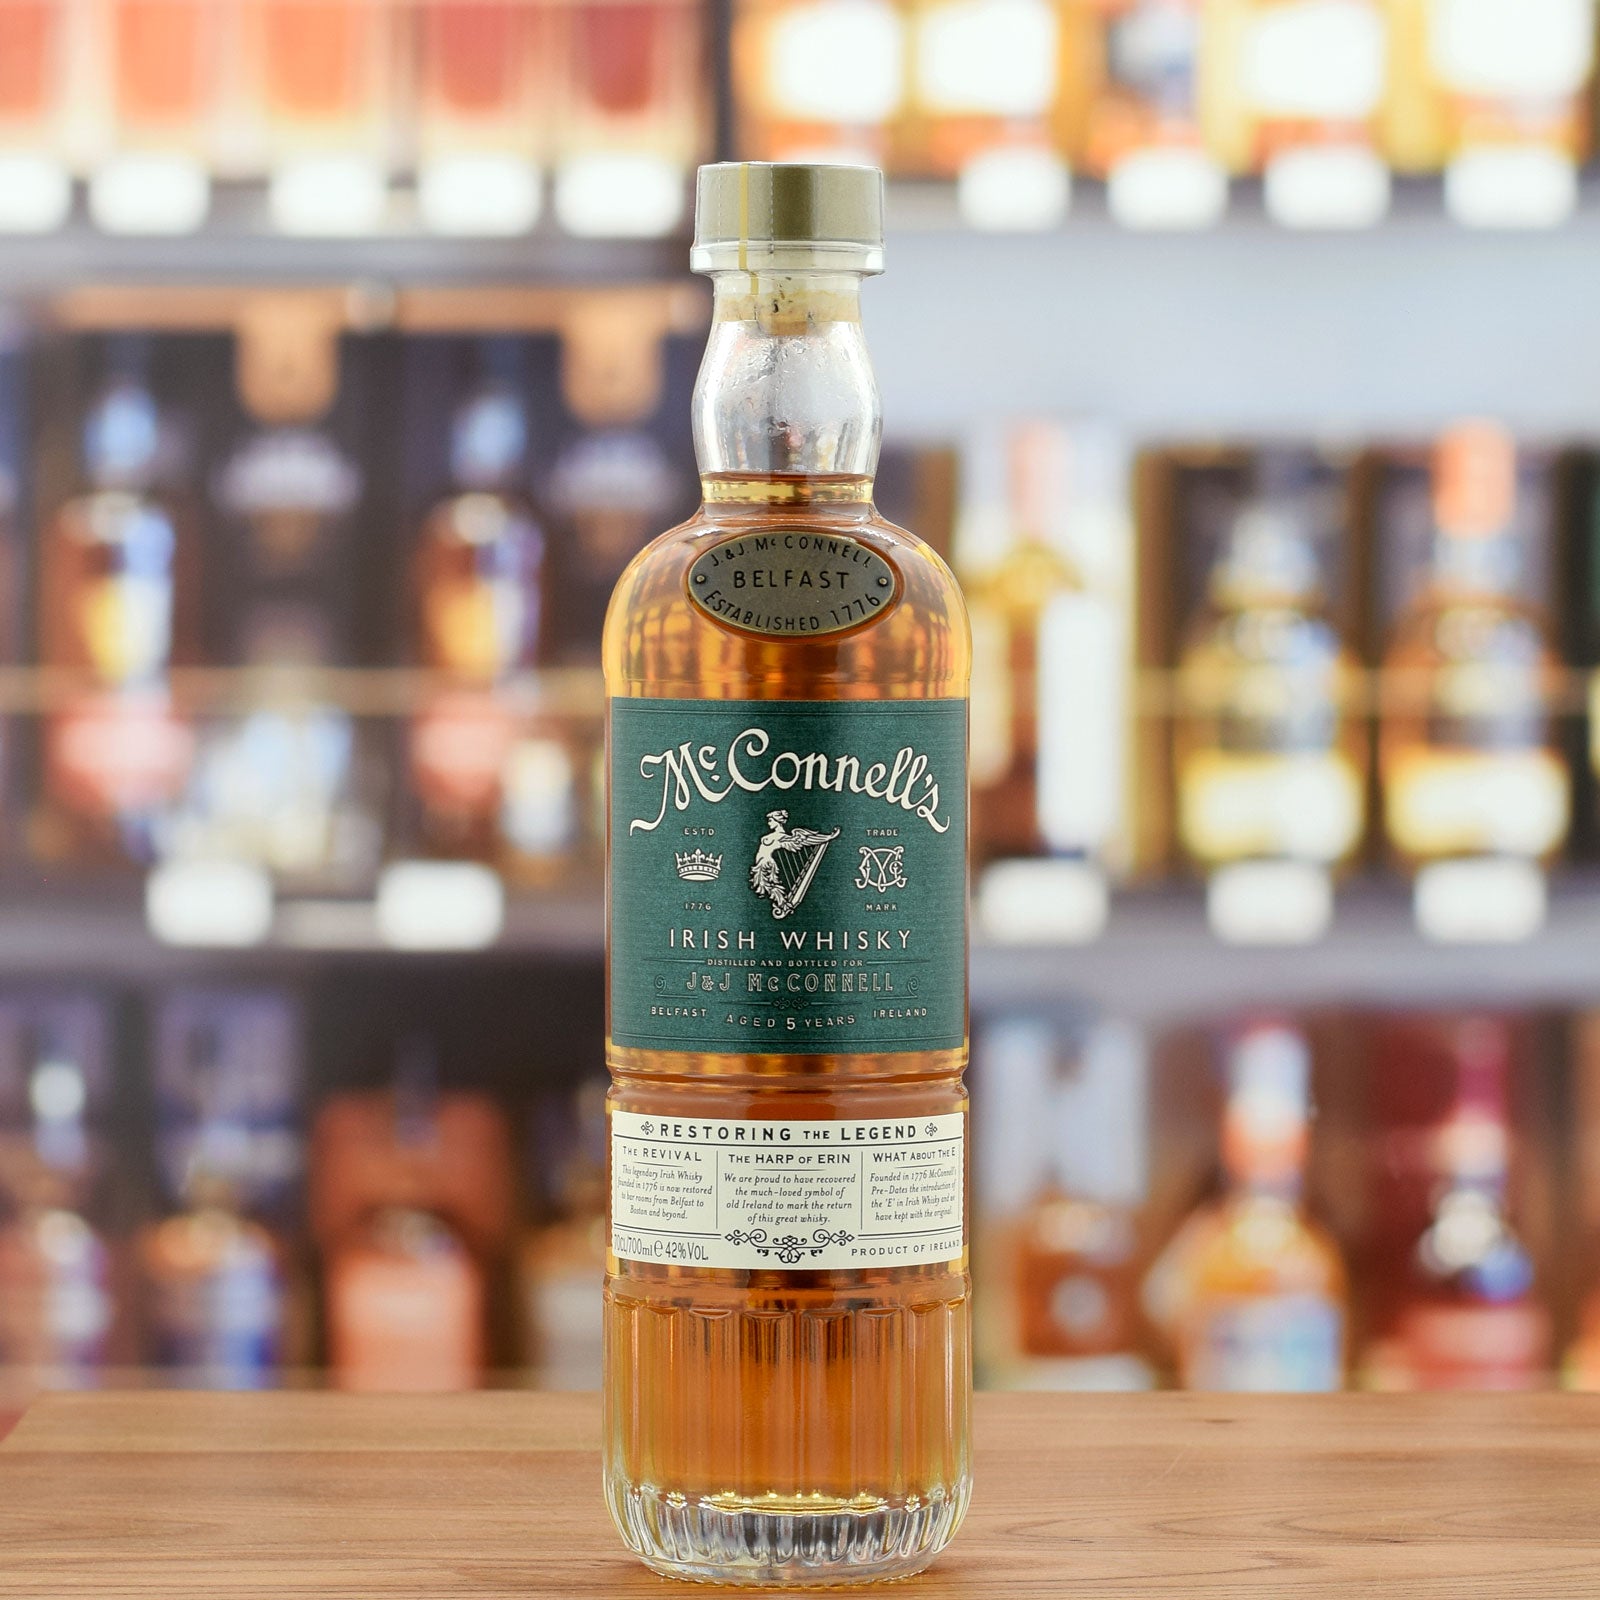 Buy McConnell's Irish Whisky 5 years old 42% Online | Whisky Galore